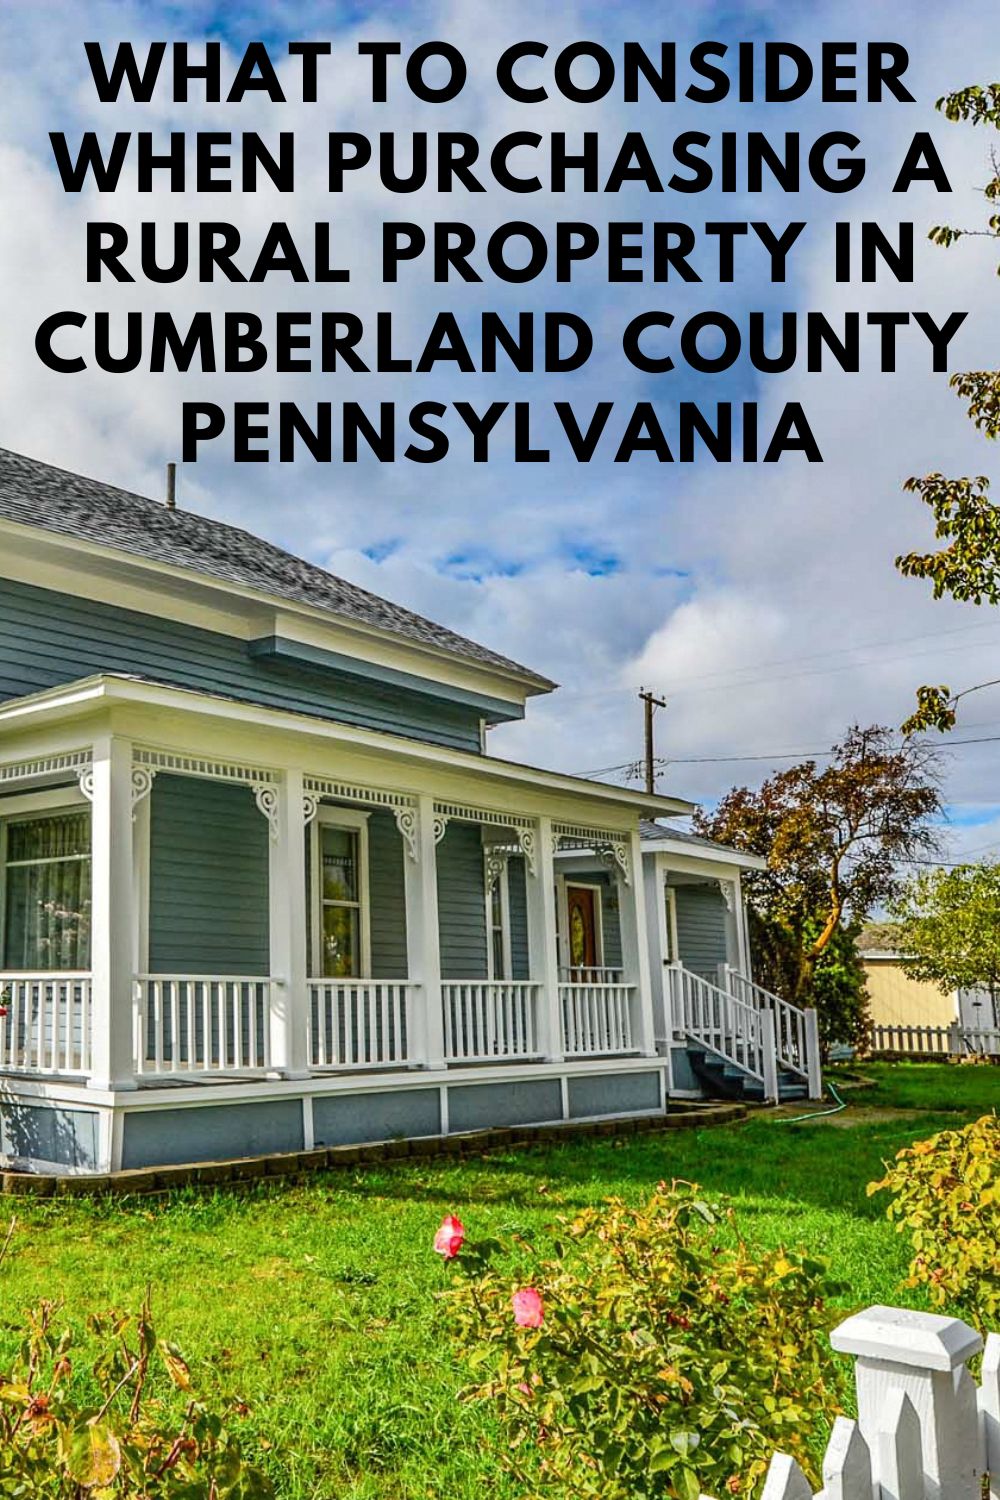 What to Consider When Purchasing a Rural Property in Cumberland County Pennsylvania